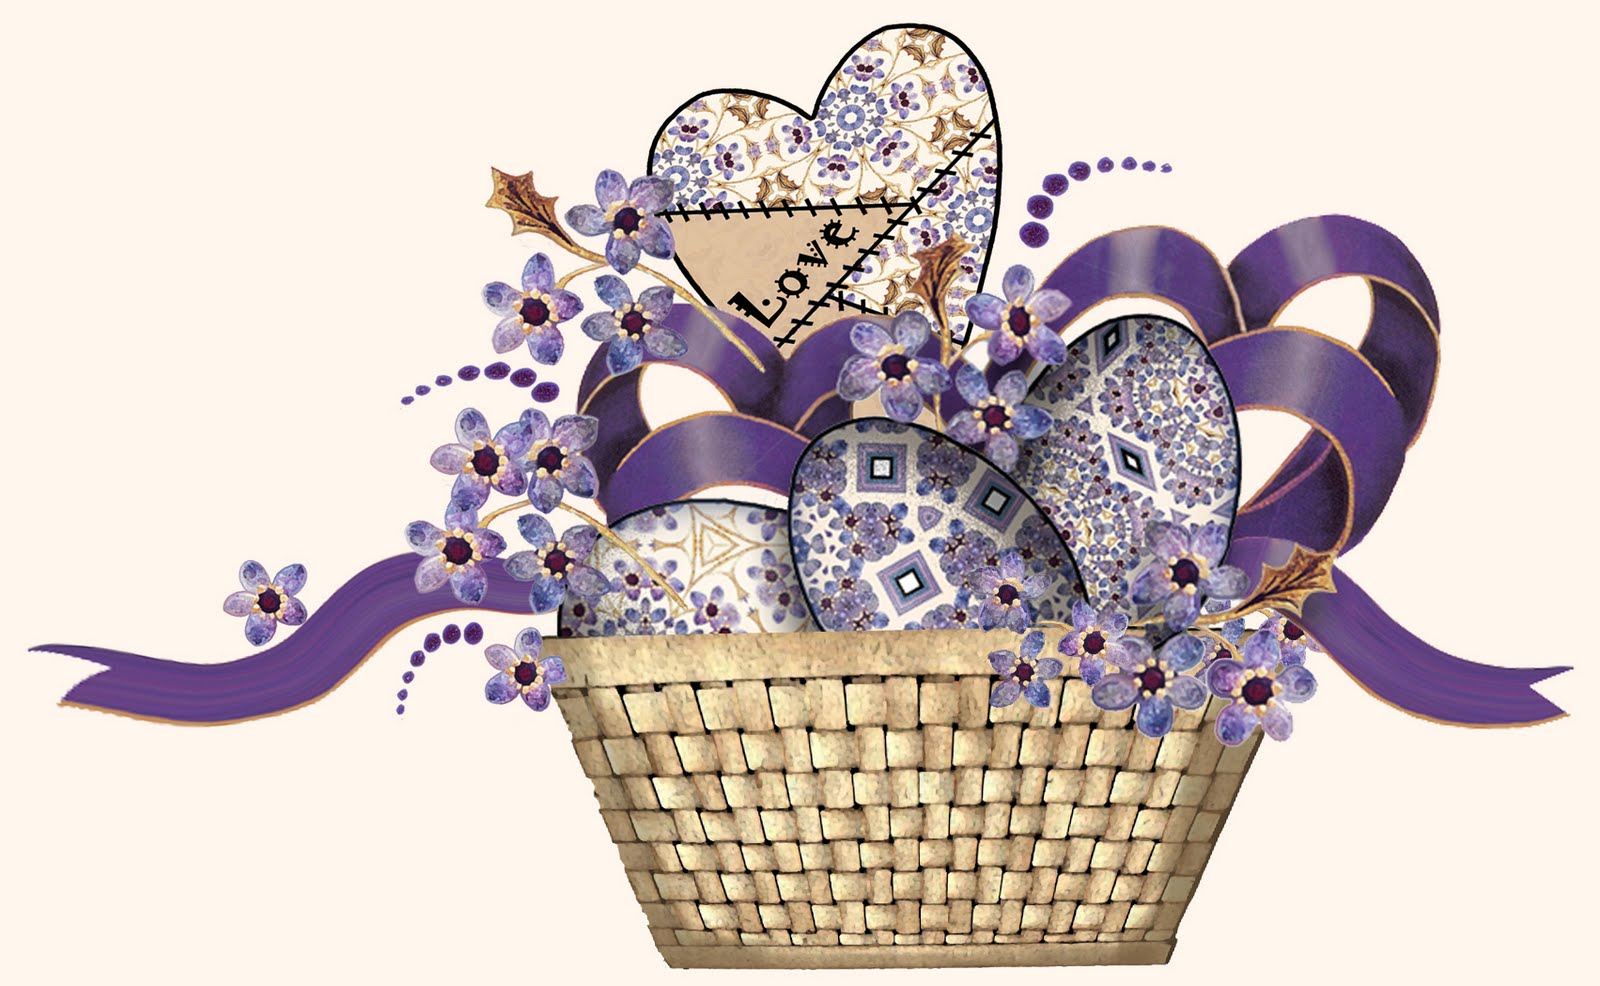 Free Gift Basket Cliparts, Download Free Clip Art, Free Clip Art on.